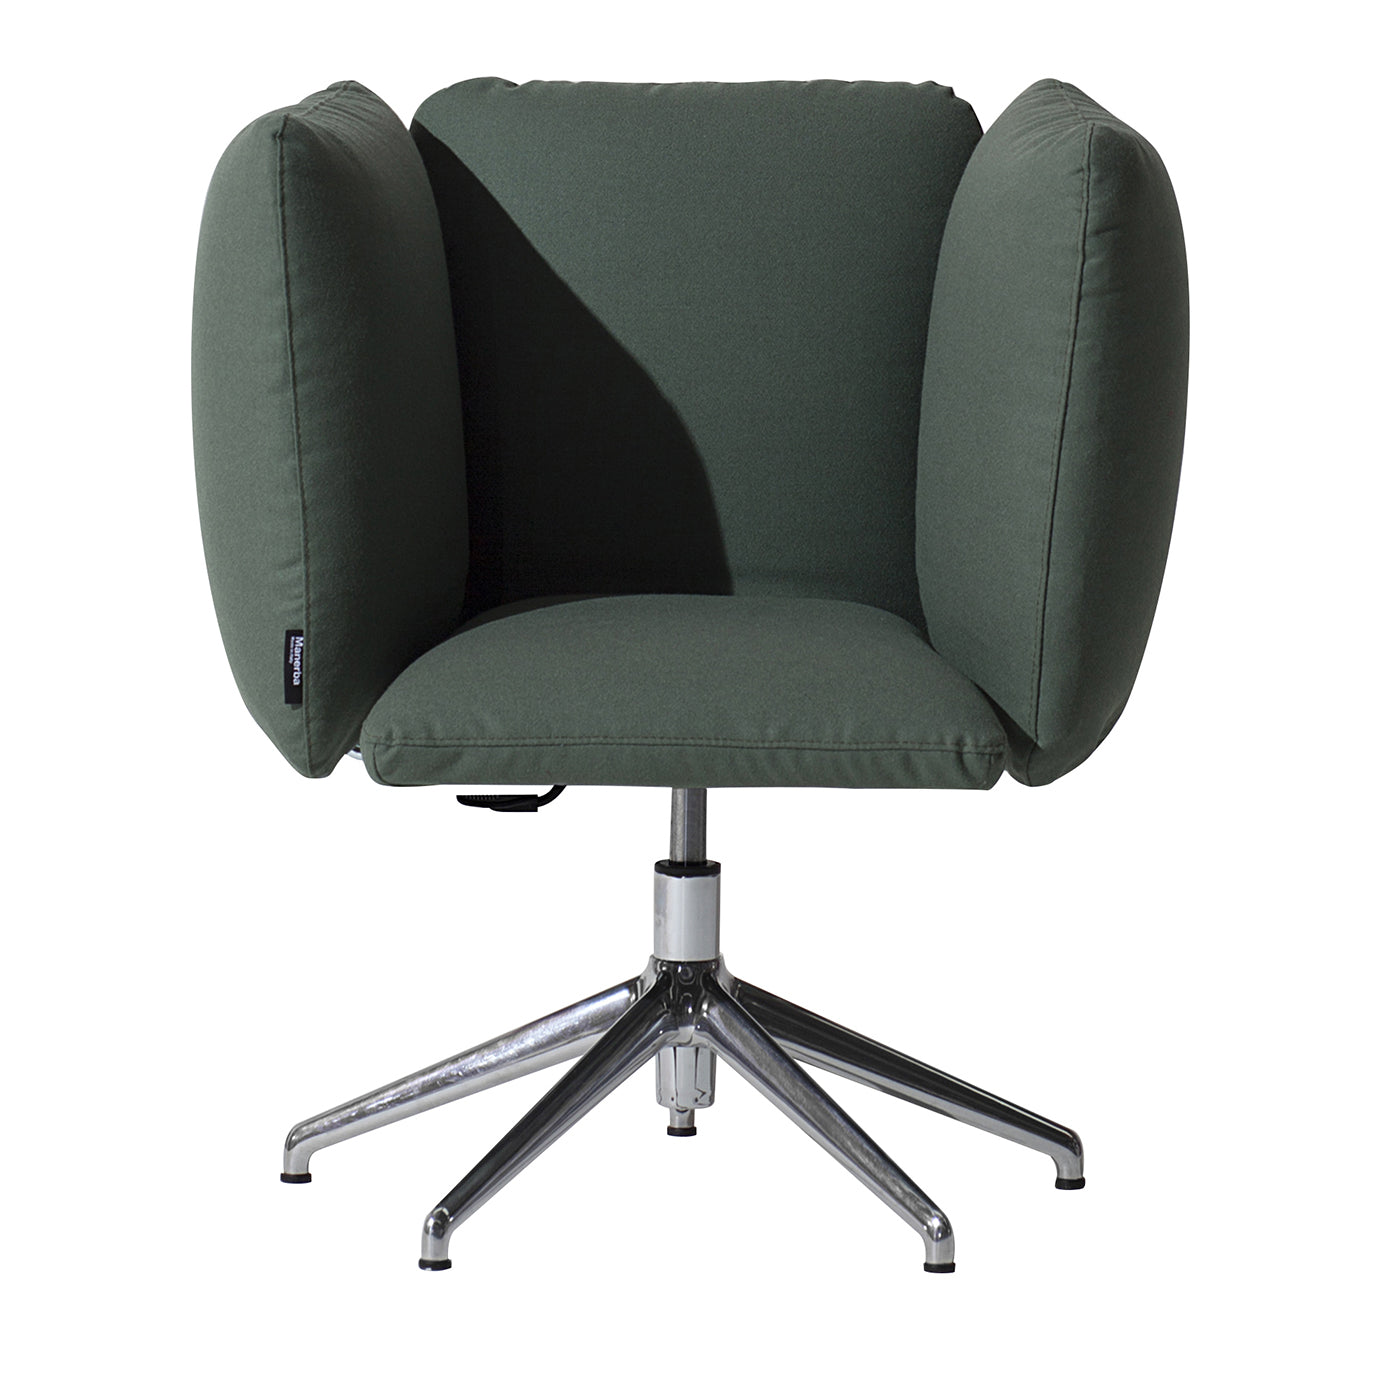 Undecided Slim Green Armchair by R. Mangiarotti and I. Suppanen - Main view